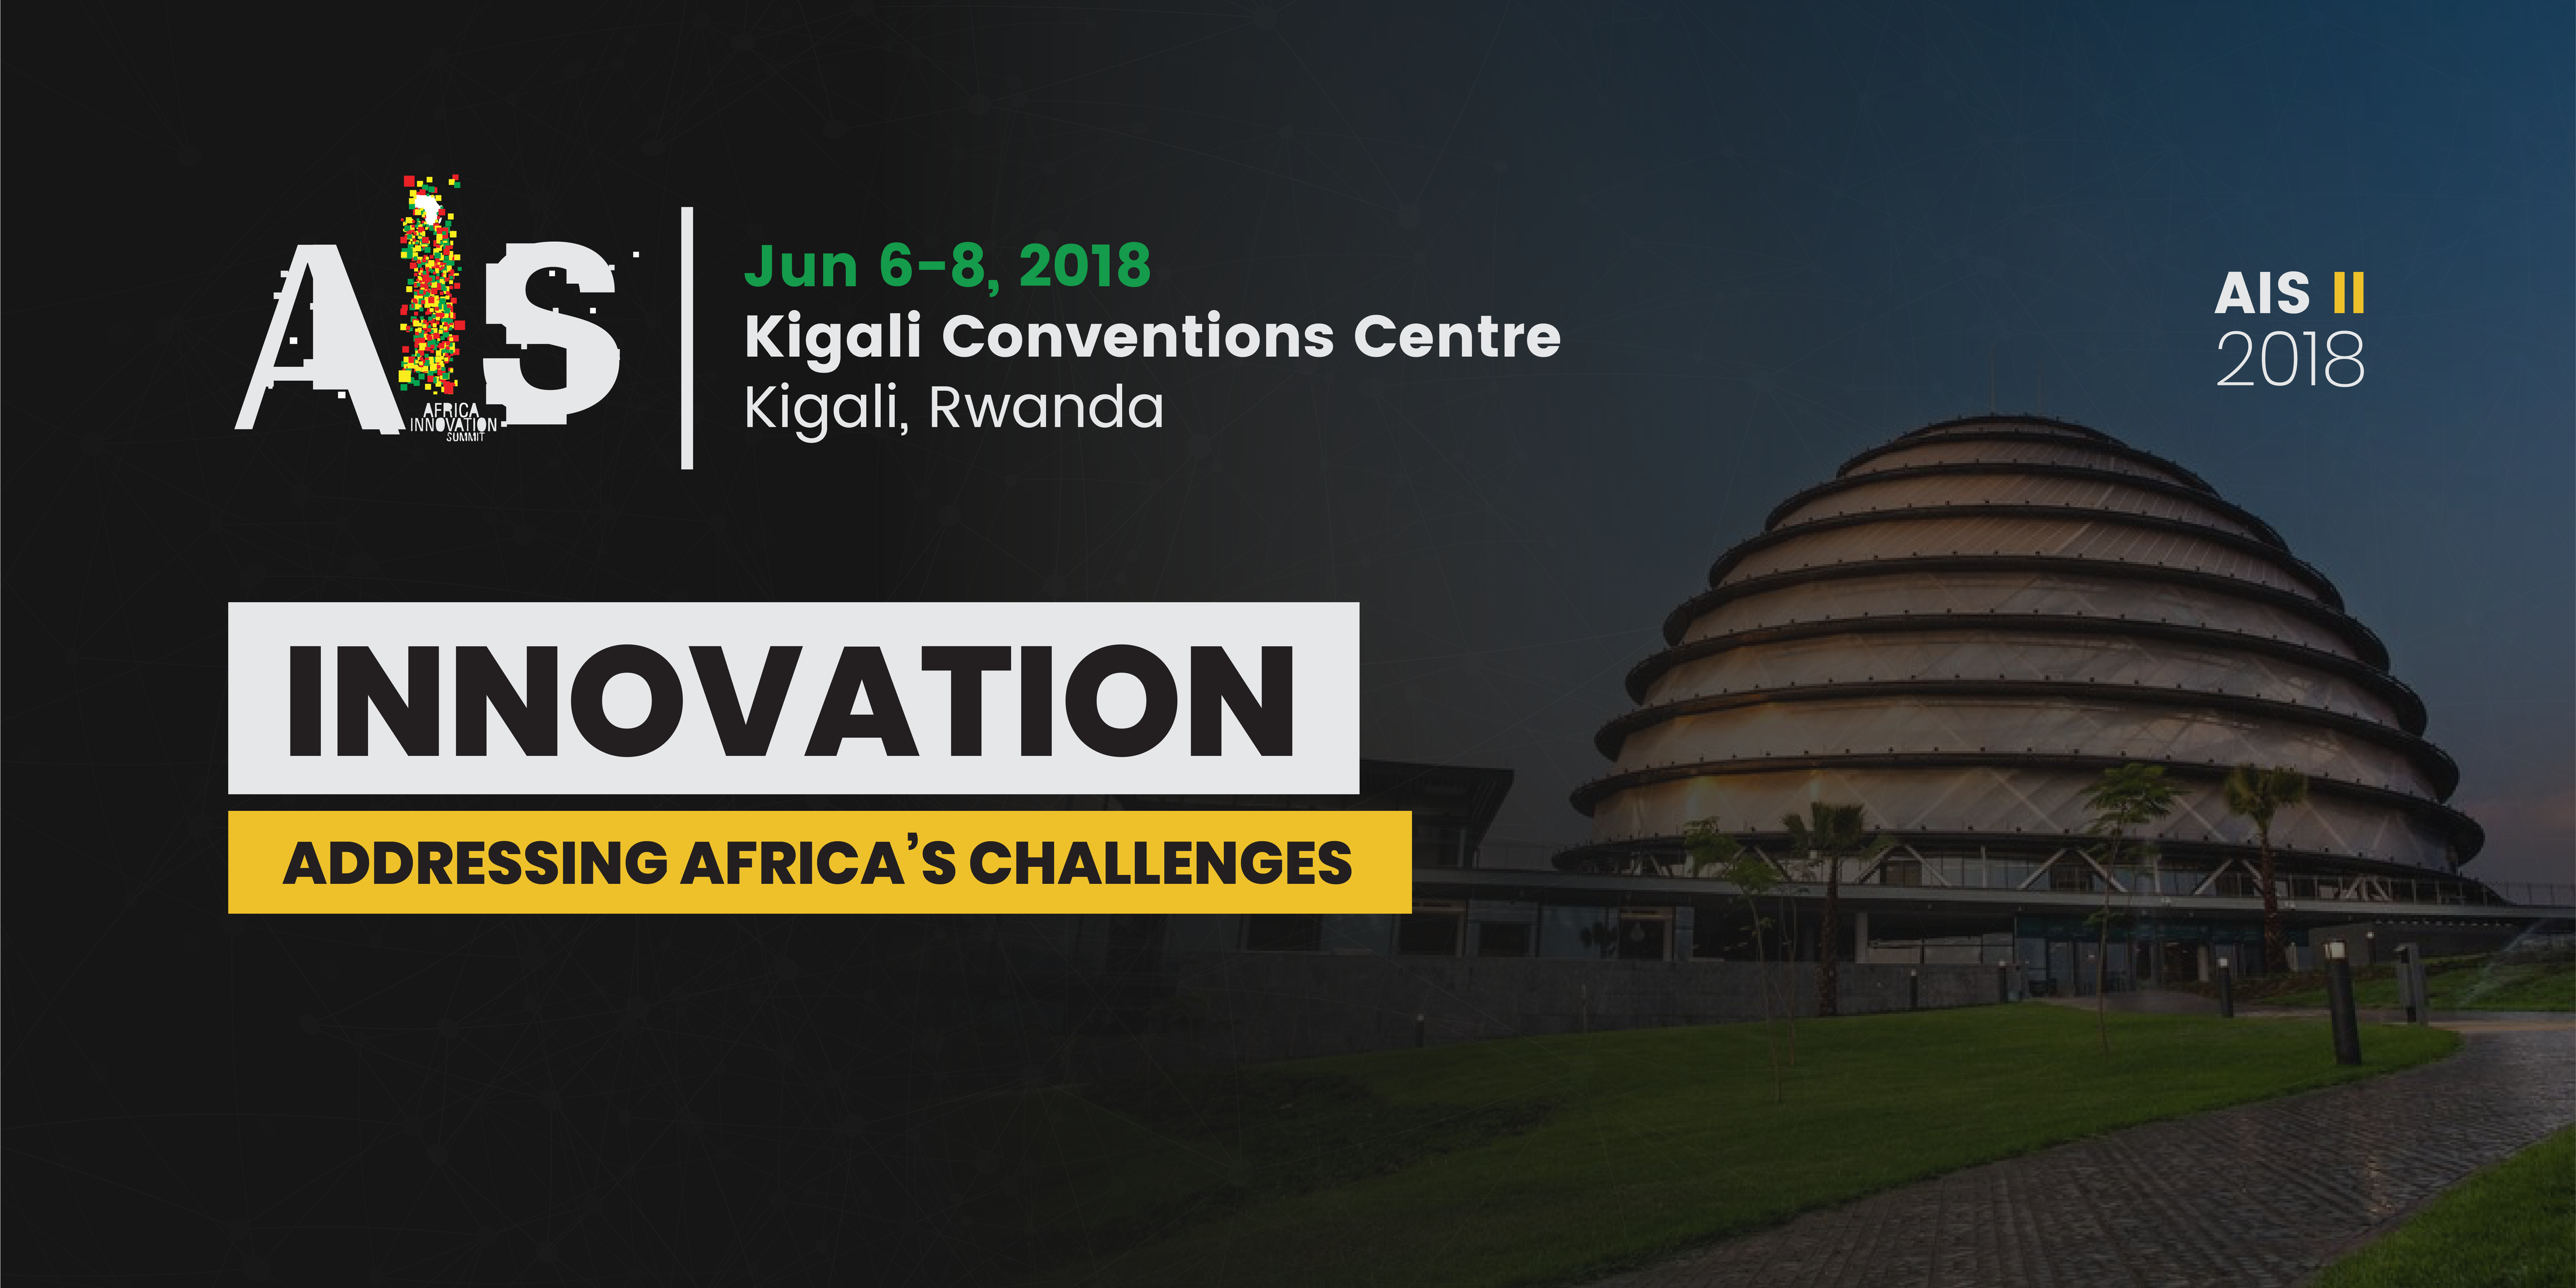 Call for Application Launched across Africa for Innovations Addressing Continent’s Challenges